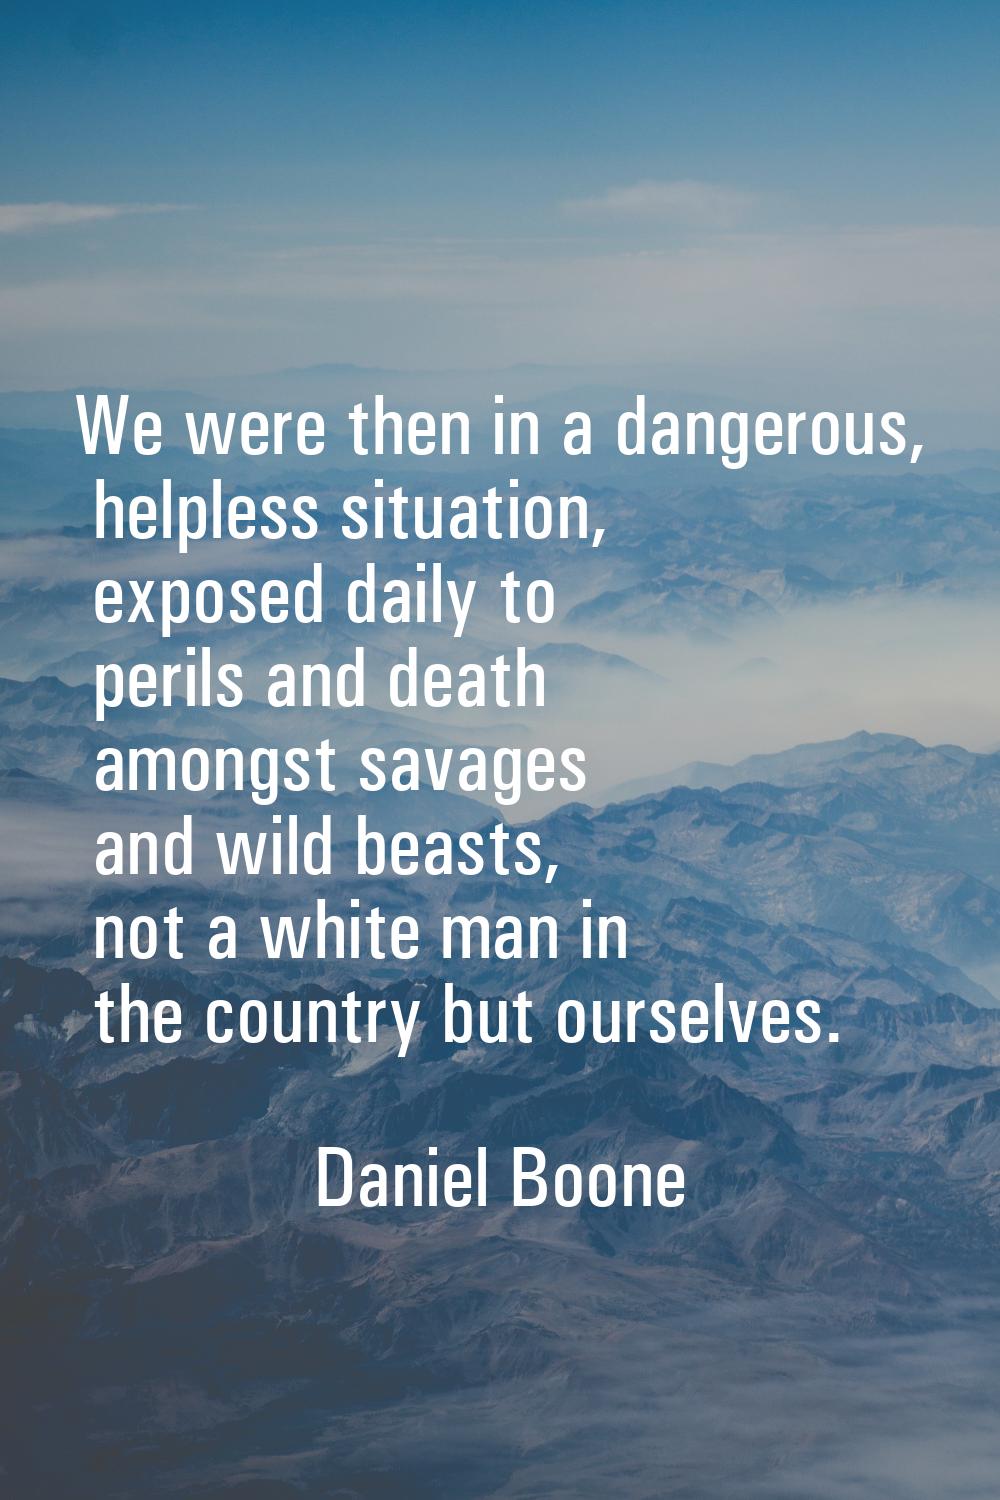 We were then in a dangerous, helpless situation, exposed daily to perils and death amongst savages 